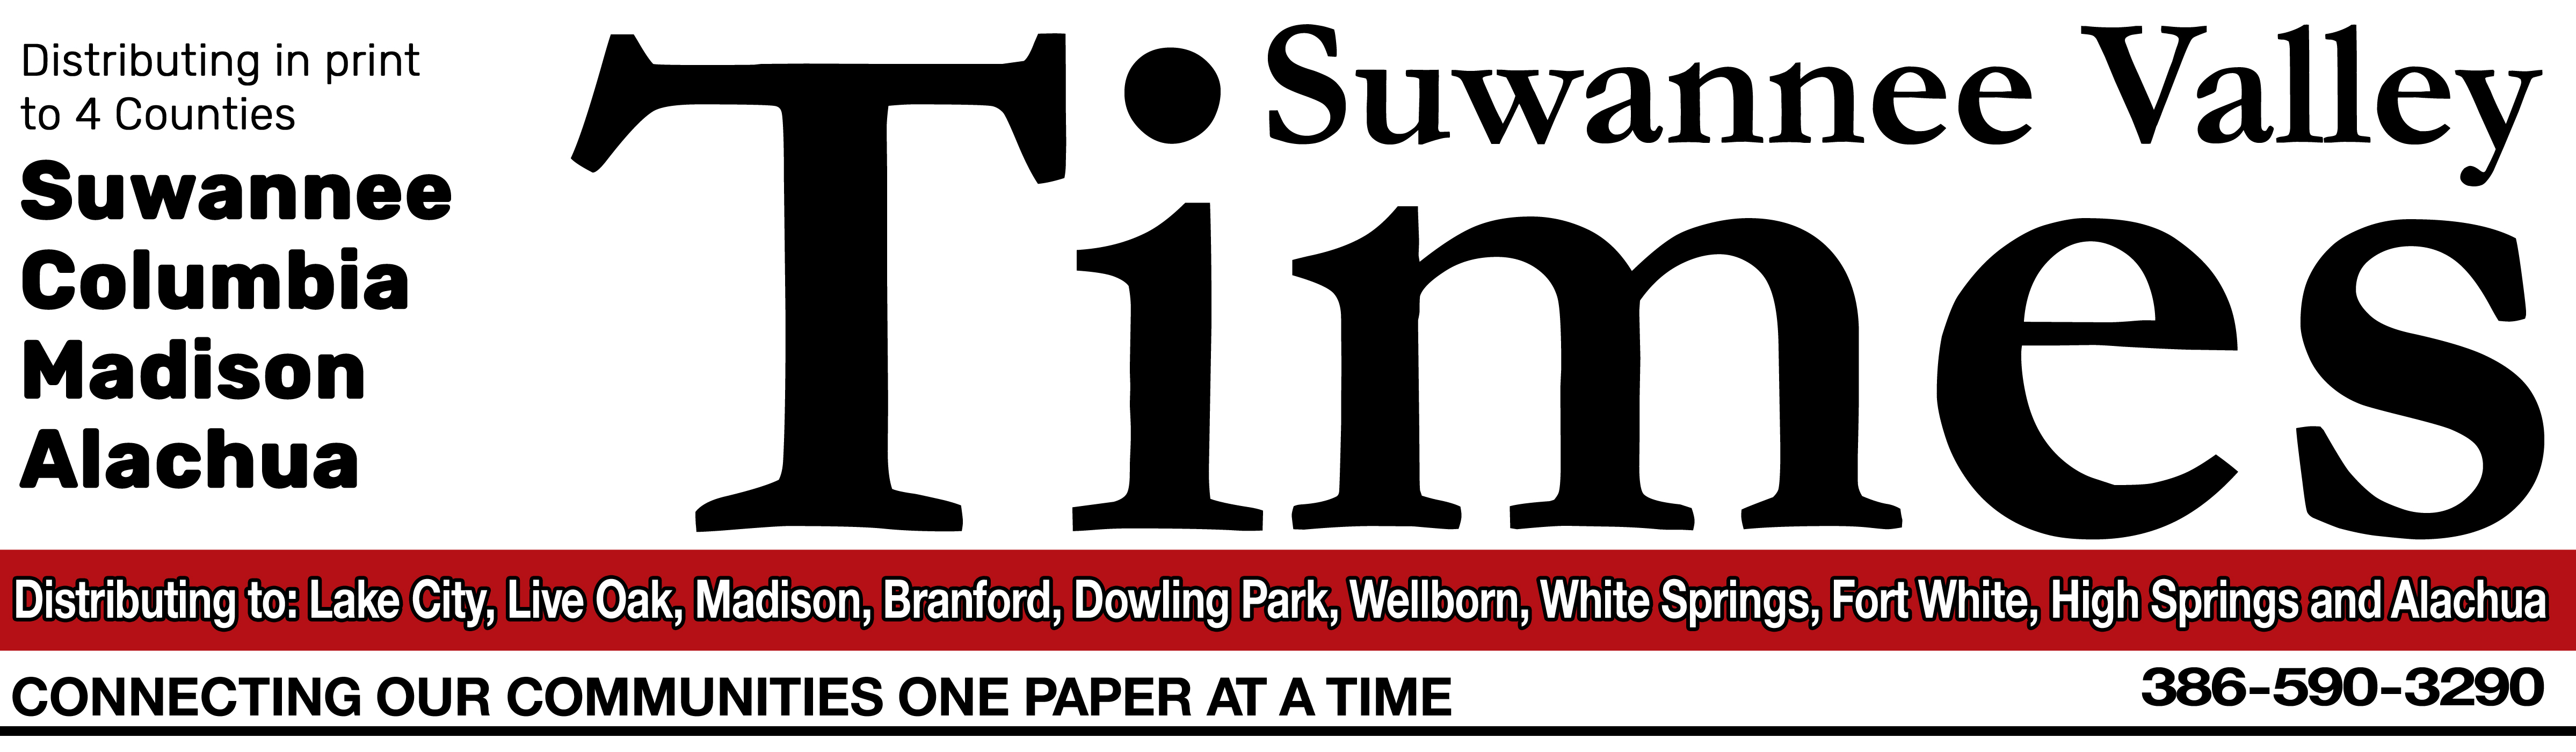 Suwannee Valley Times is distributed into the following cities and towns: Lake City, Live Oak, Madison, Branford, Dowling Park, Falmouth, Lee, Wellborn, Jasper, White Springs, Fort White, High Springs and Alachua